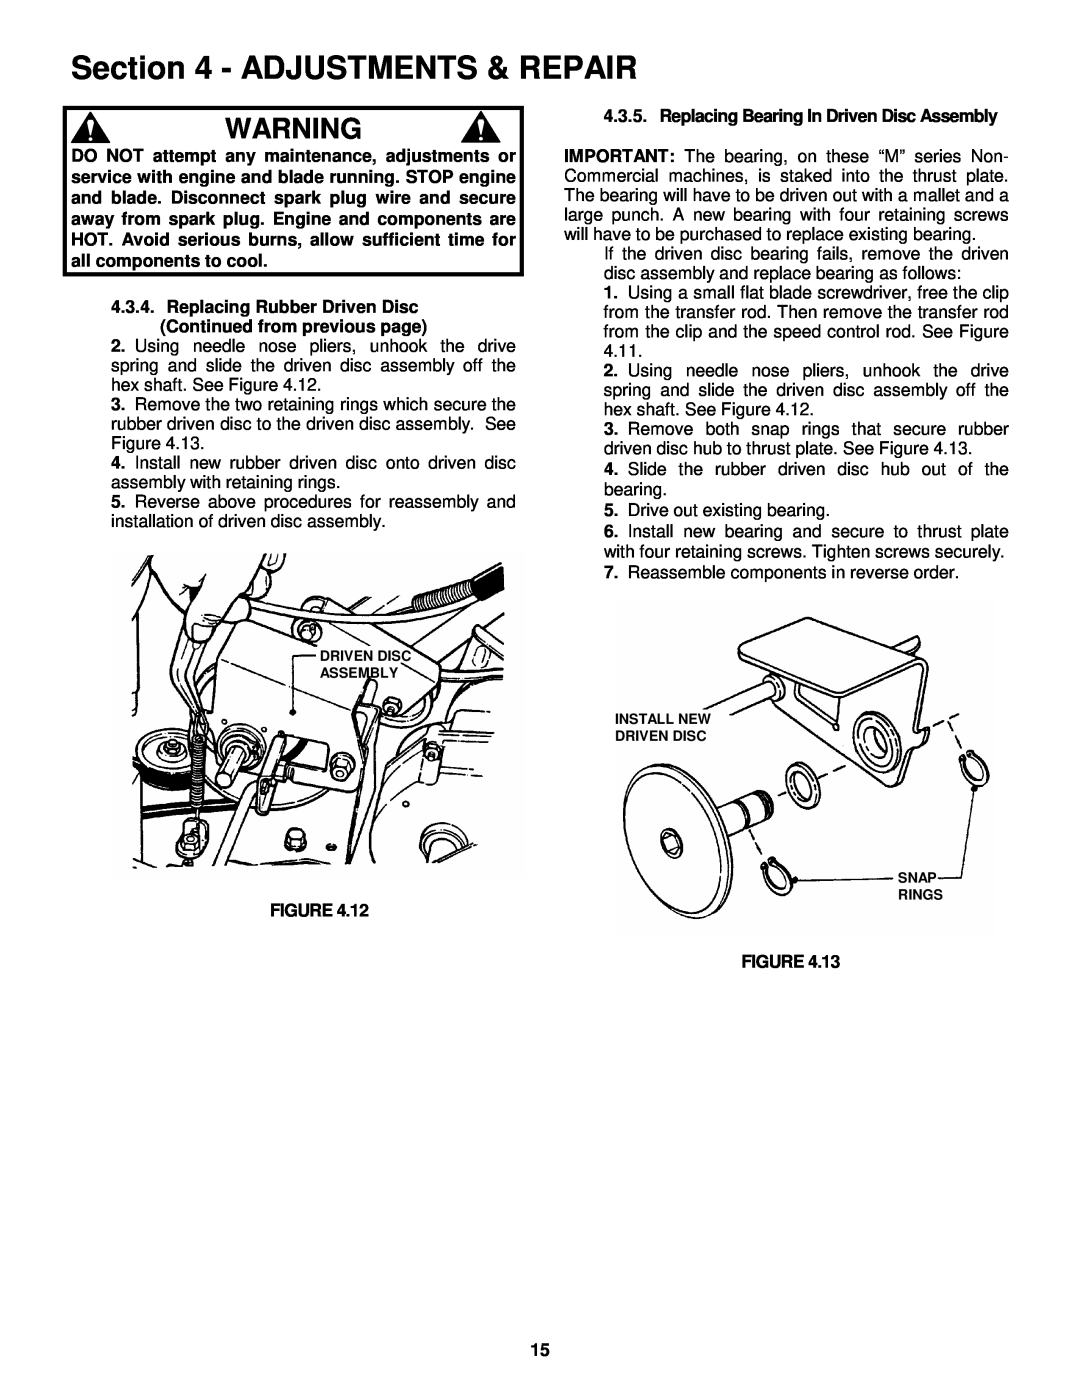 Snapper MRP216015B Adjustments & Repair, Replacing Bearing In Driven Disc Assembly, Figure Figure 